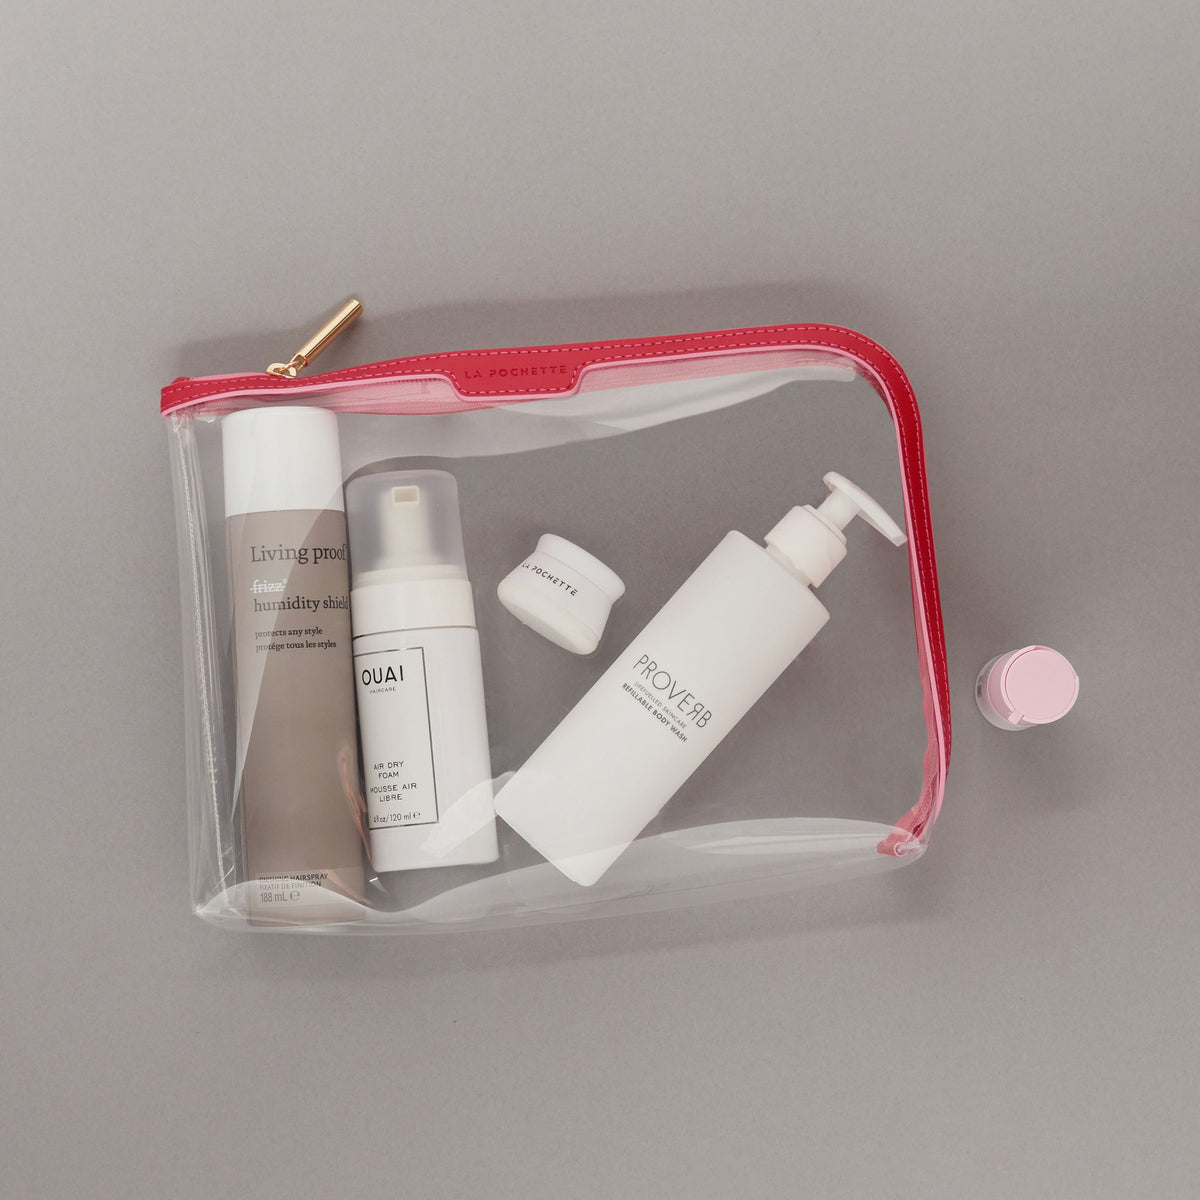 Large Anywhere Everywhere Pouch in Cashmere White colourway containing beauty accessories 